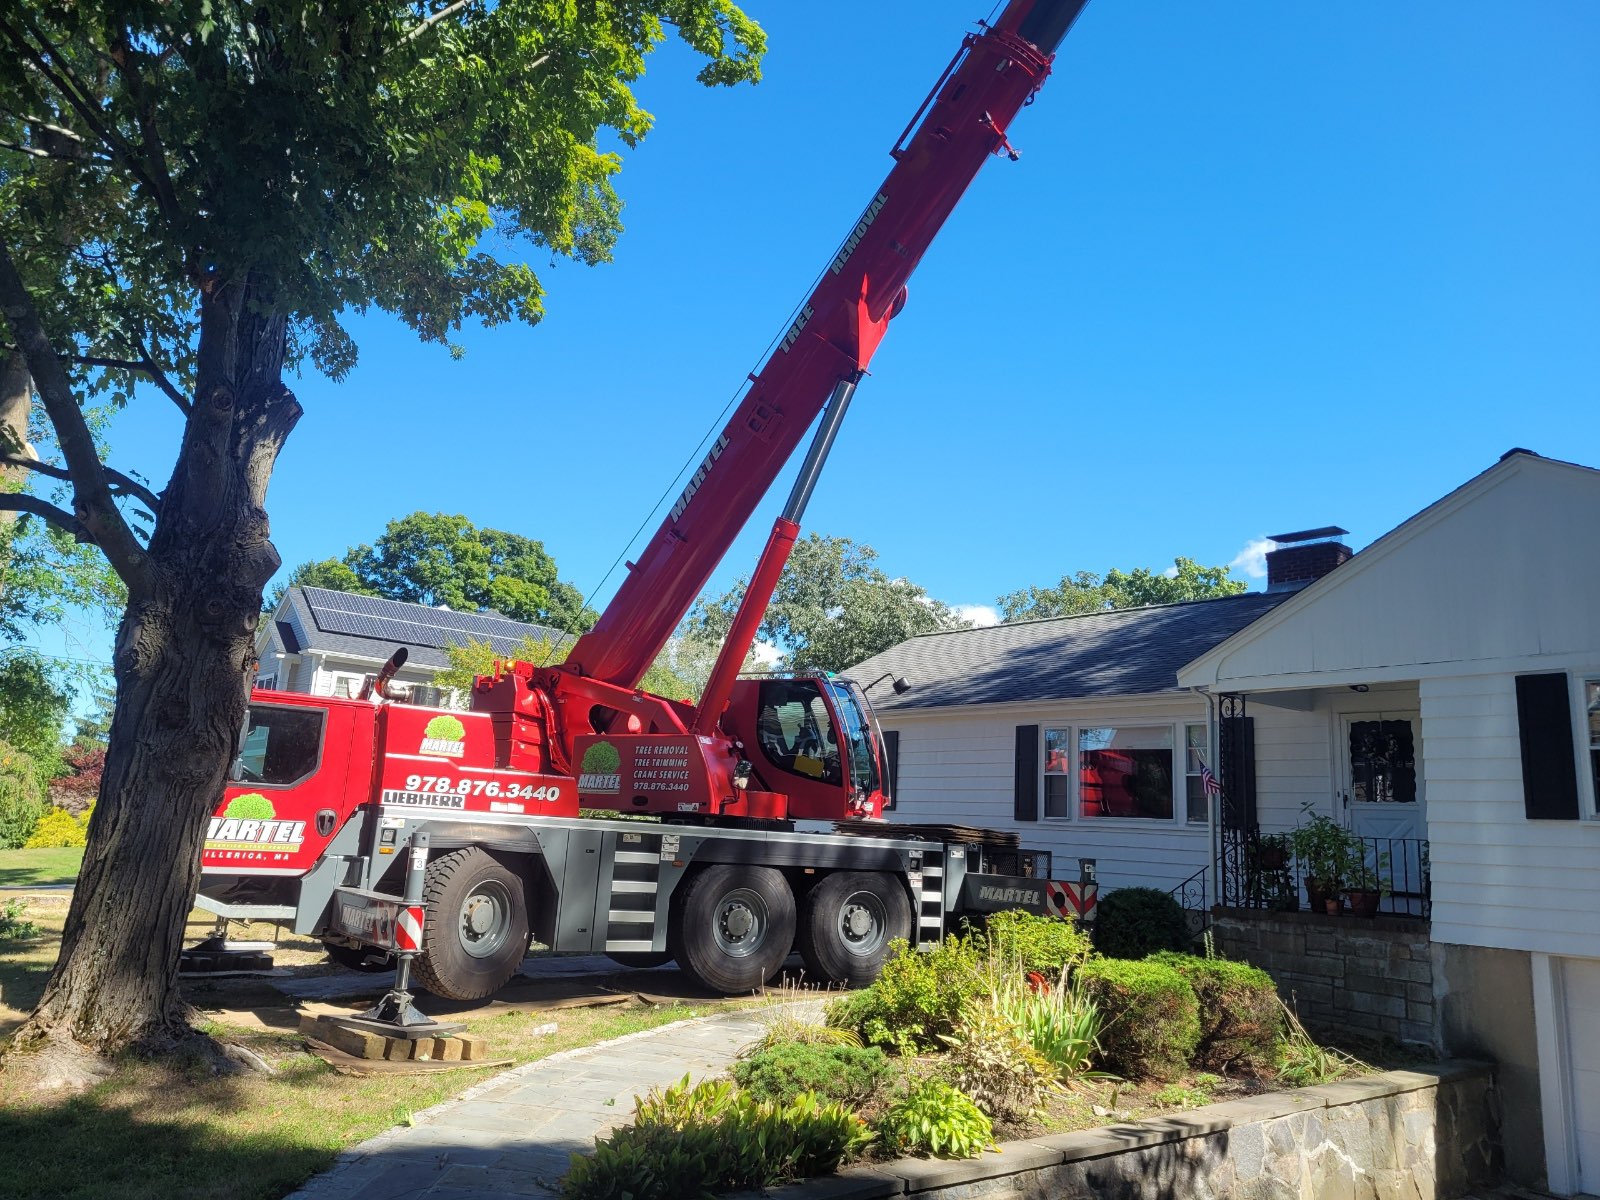 Martel Crane and Tree setup the red crane in the front yard of this home in Lexington, MA to safely remove trees.